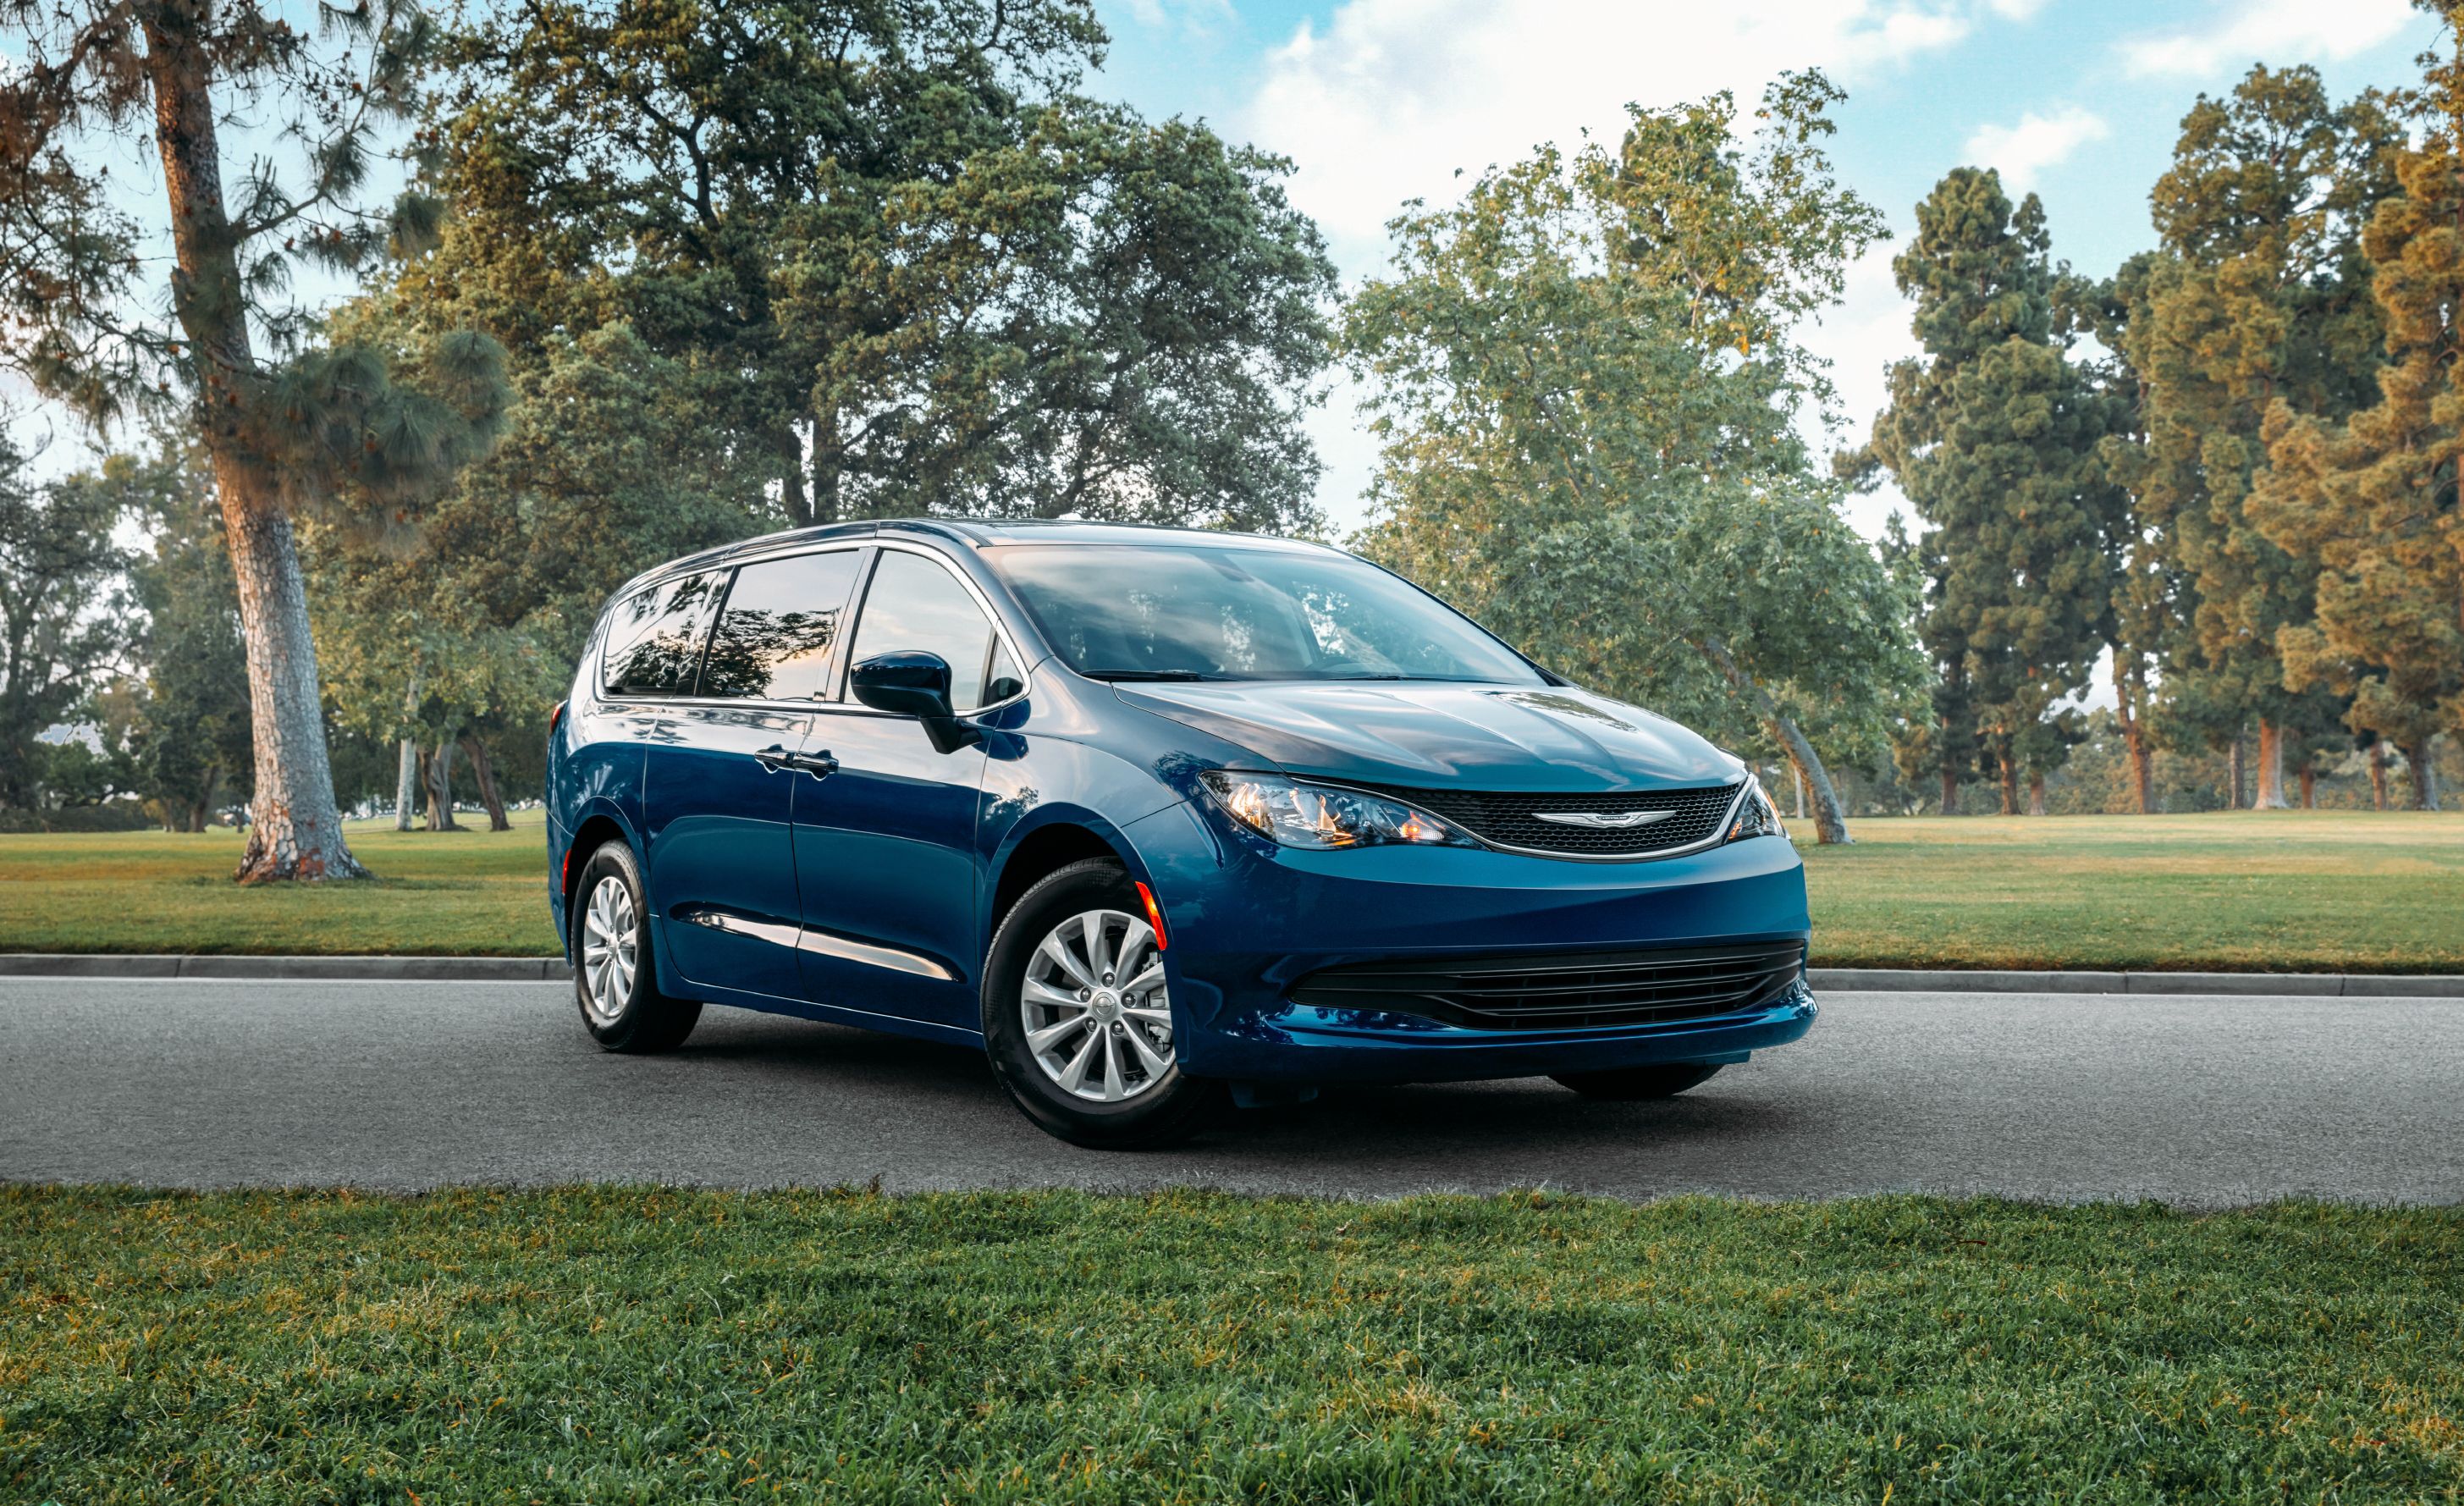 2020 Chrysler Voyager Review, Pricing 